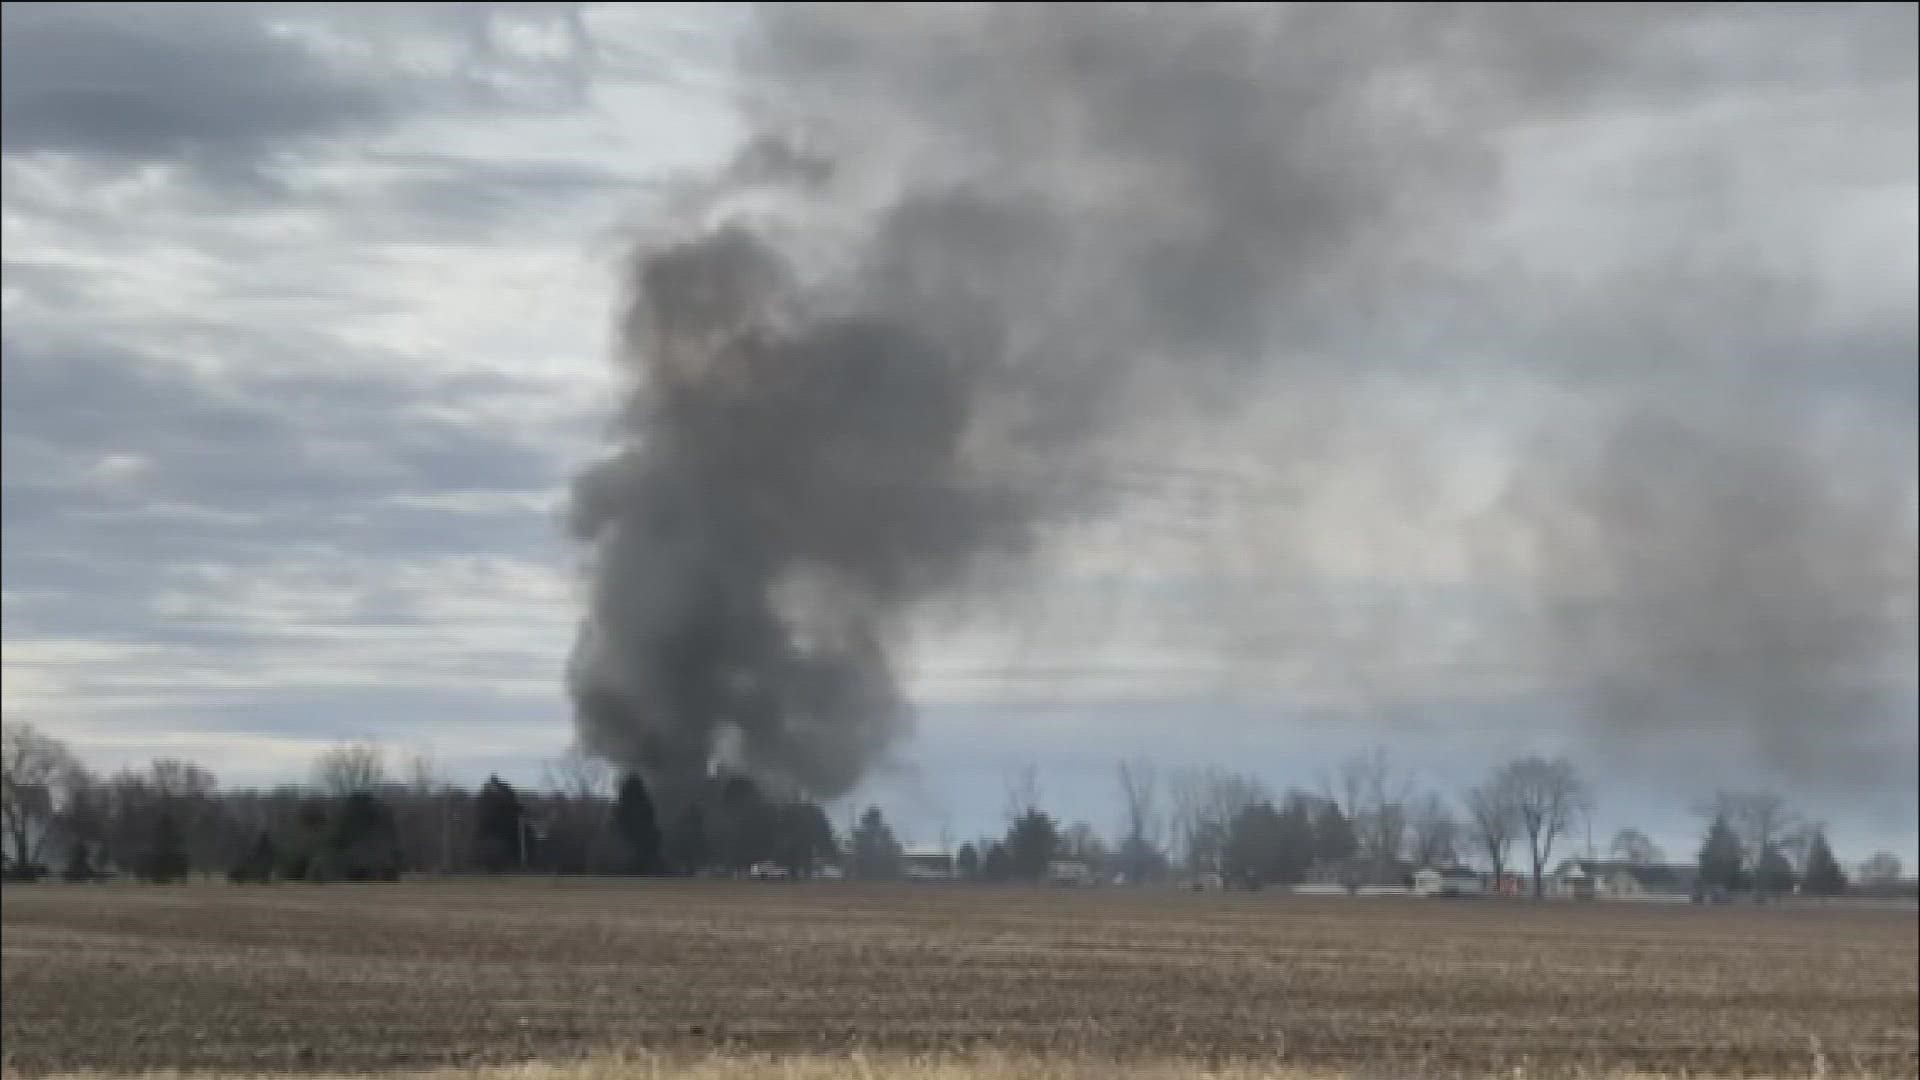 Officials in Middleton Township believe the fire may have been caused by burning leaves.